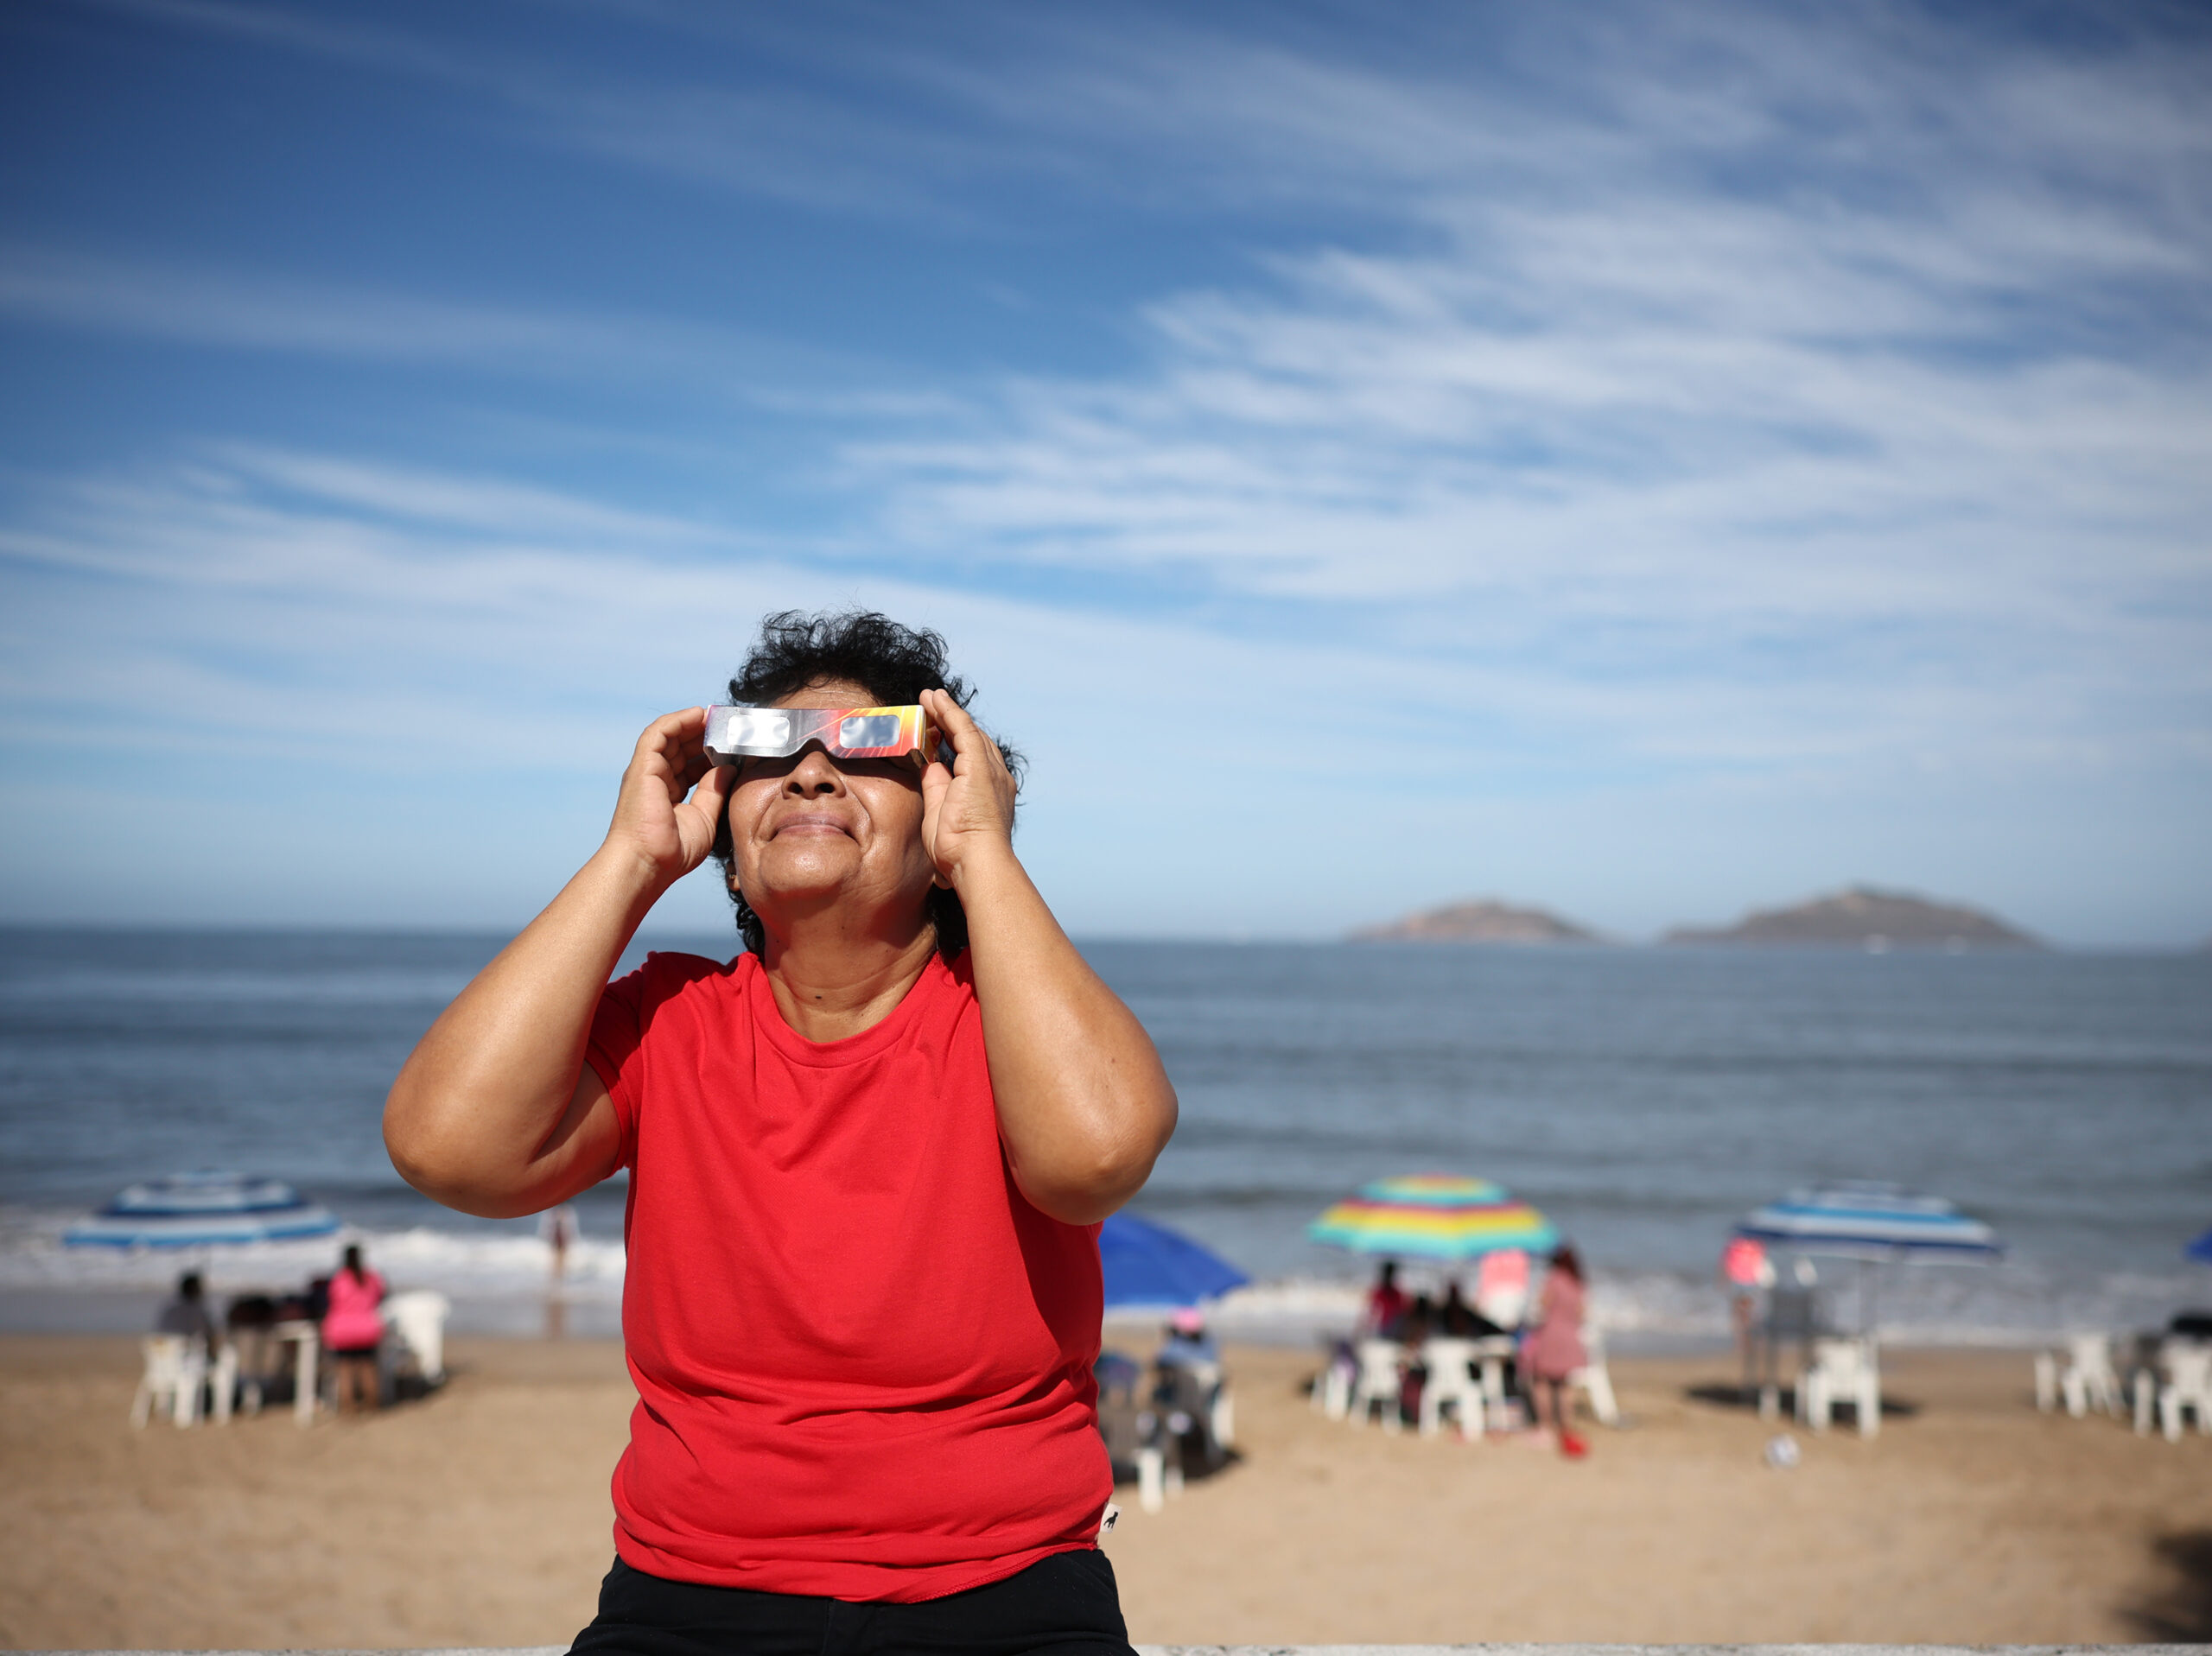 Mexico’s beach party is excited to see the eclipse first emerge